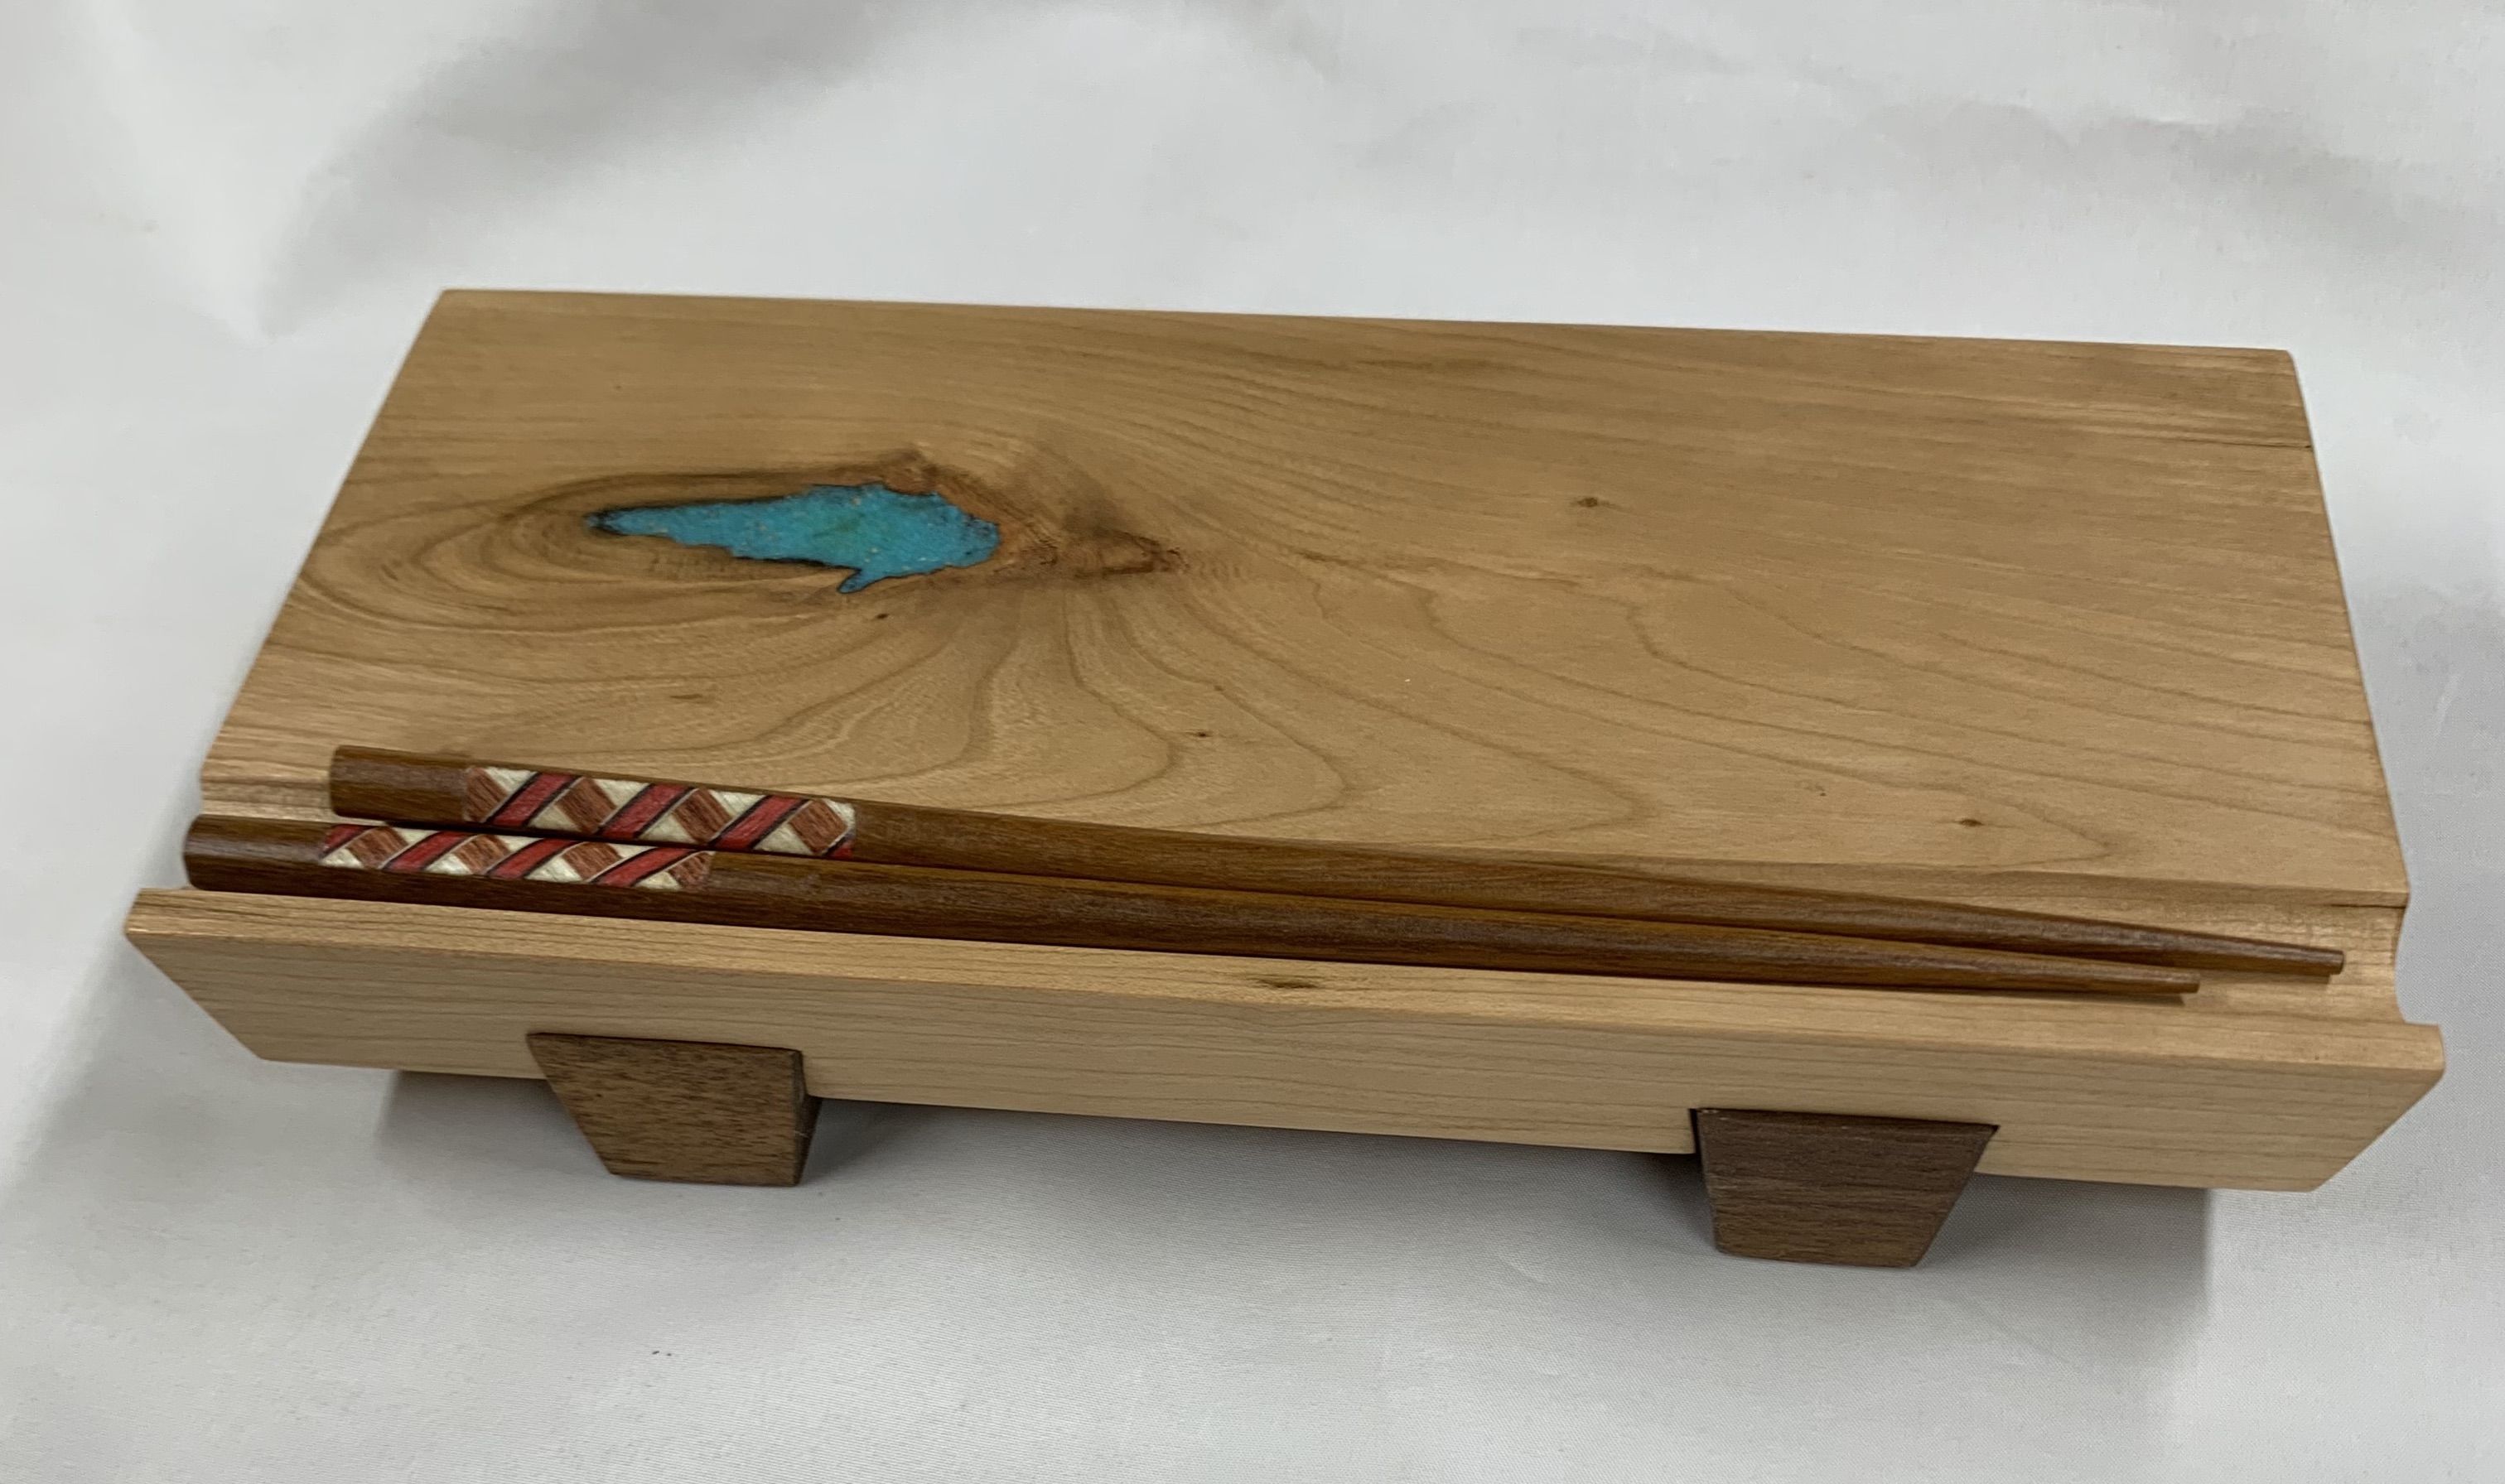 Custom Handcrafted Sushi Board, Serving Tray with Chop Stix